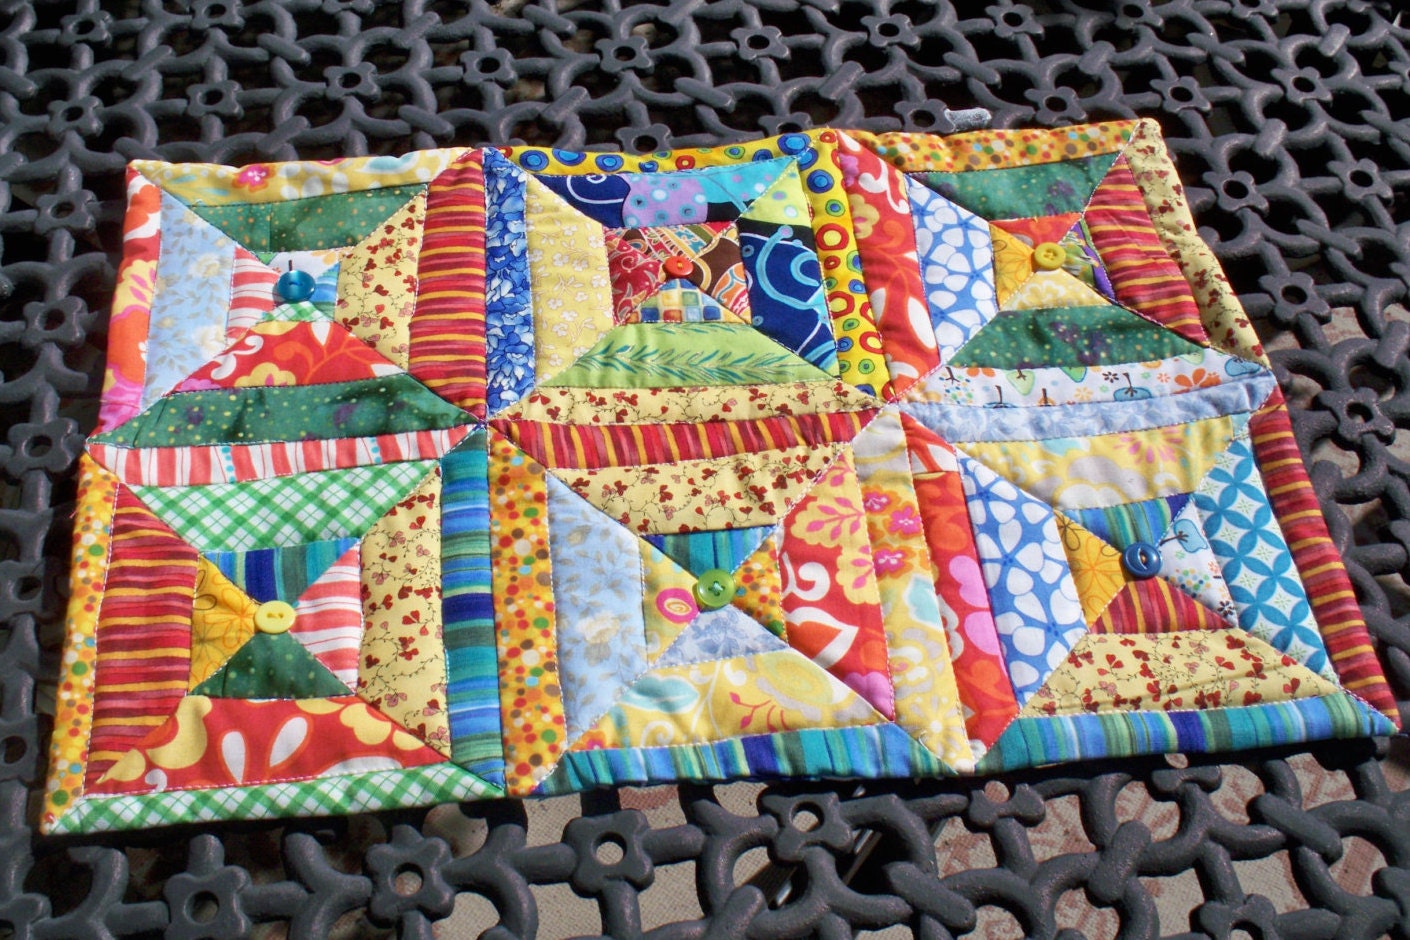 SUMMER TABLE RUNNER 12 X 18 Handmade quilted decor by quiltingcafe